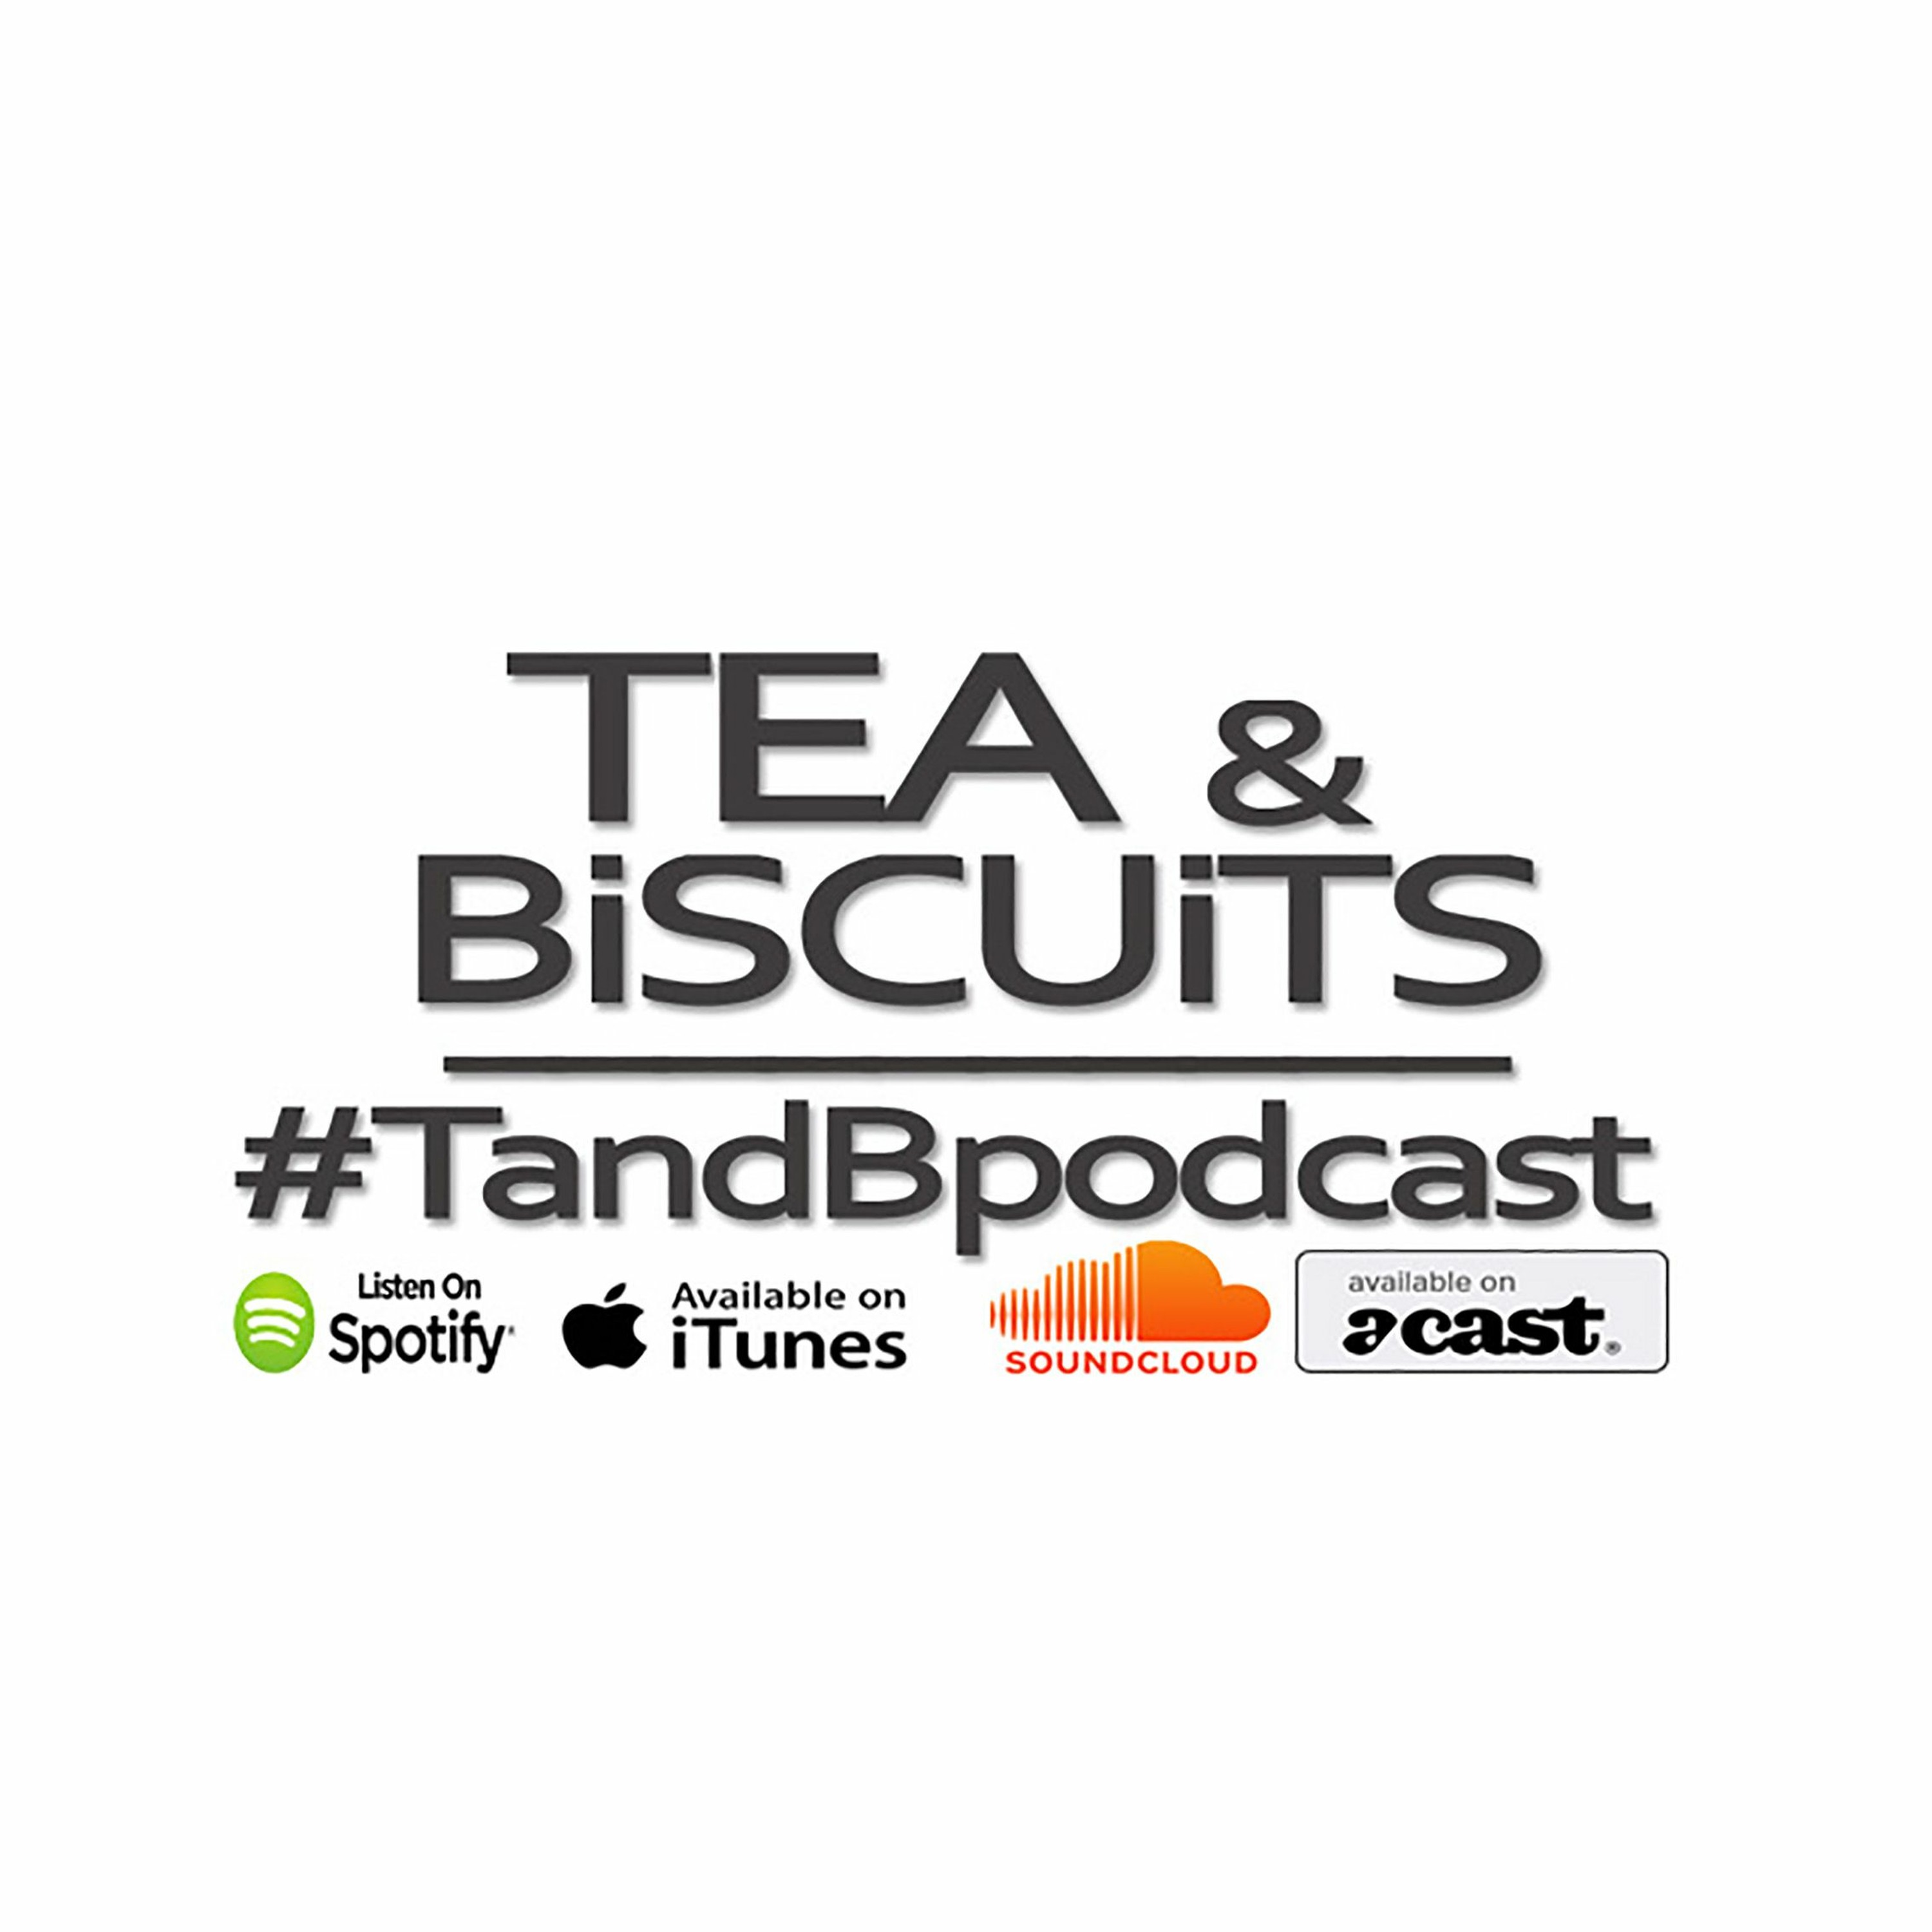 A billion minutes later | Tea & biscuits the podcast ep. 96 (YouTube ep. 1)